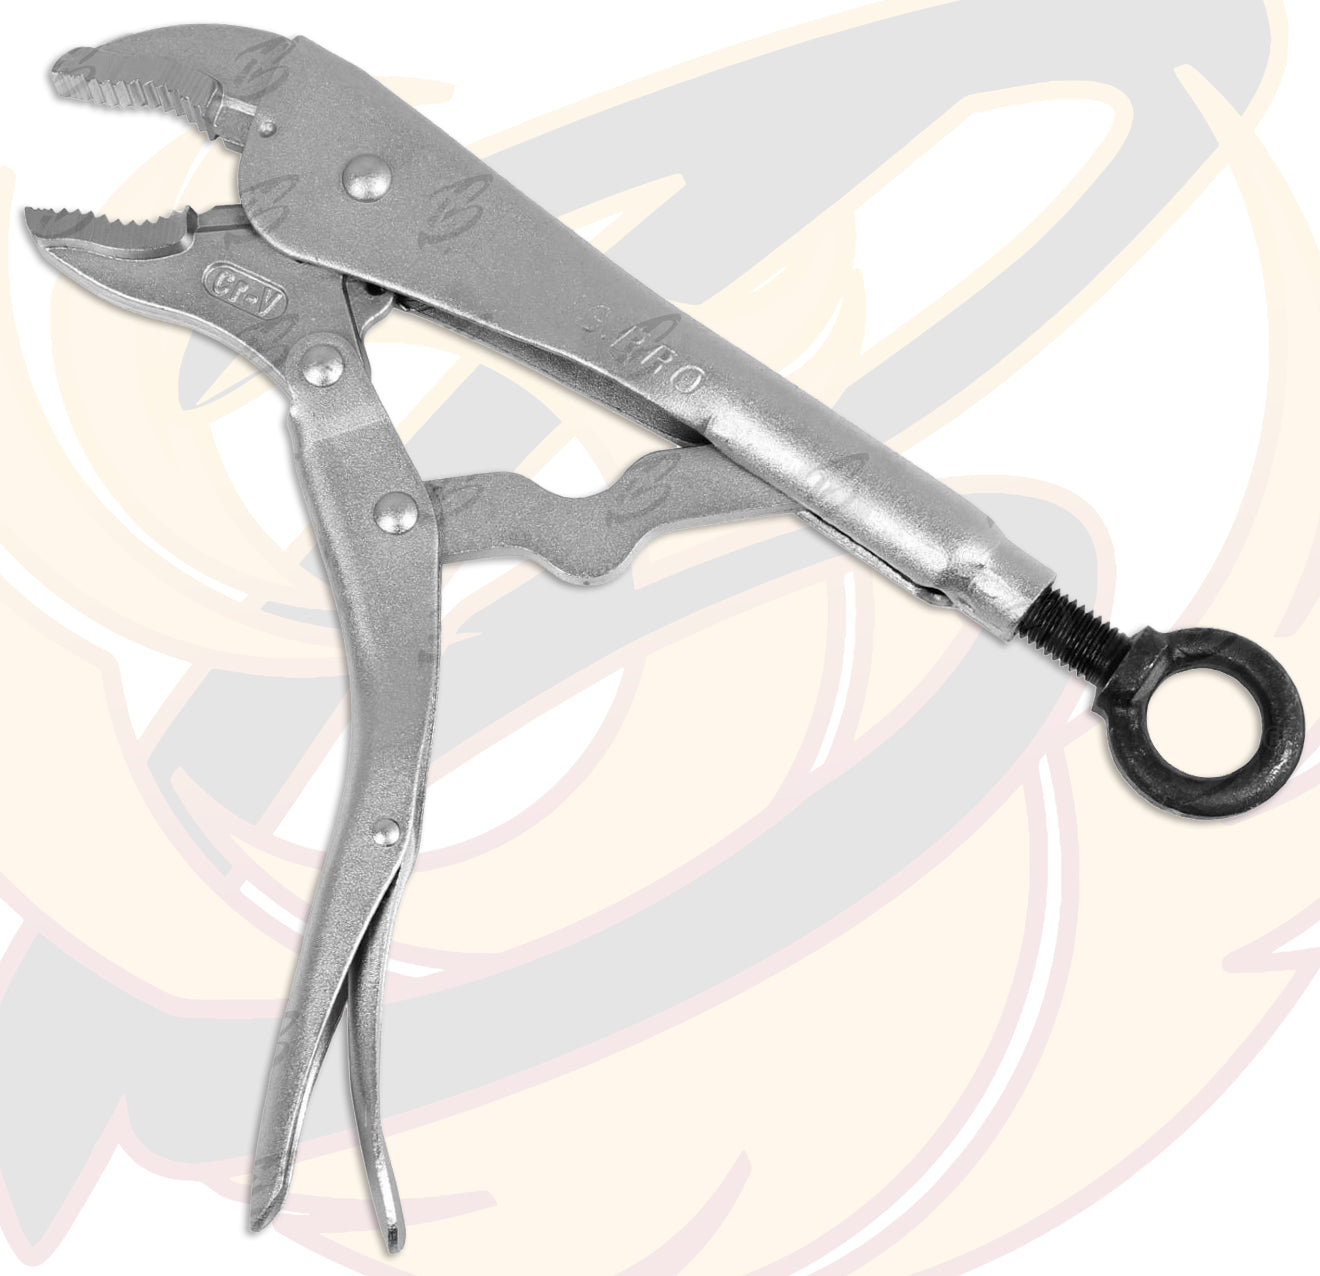 US PRO 10" CURVED JAW LOCKING PLIER WITH EASY ADJUSTMENT